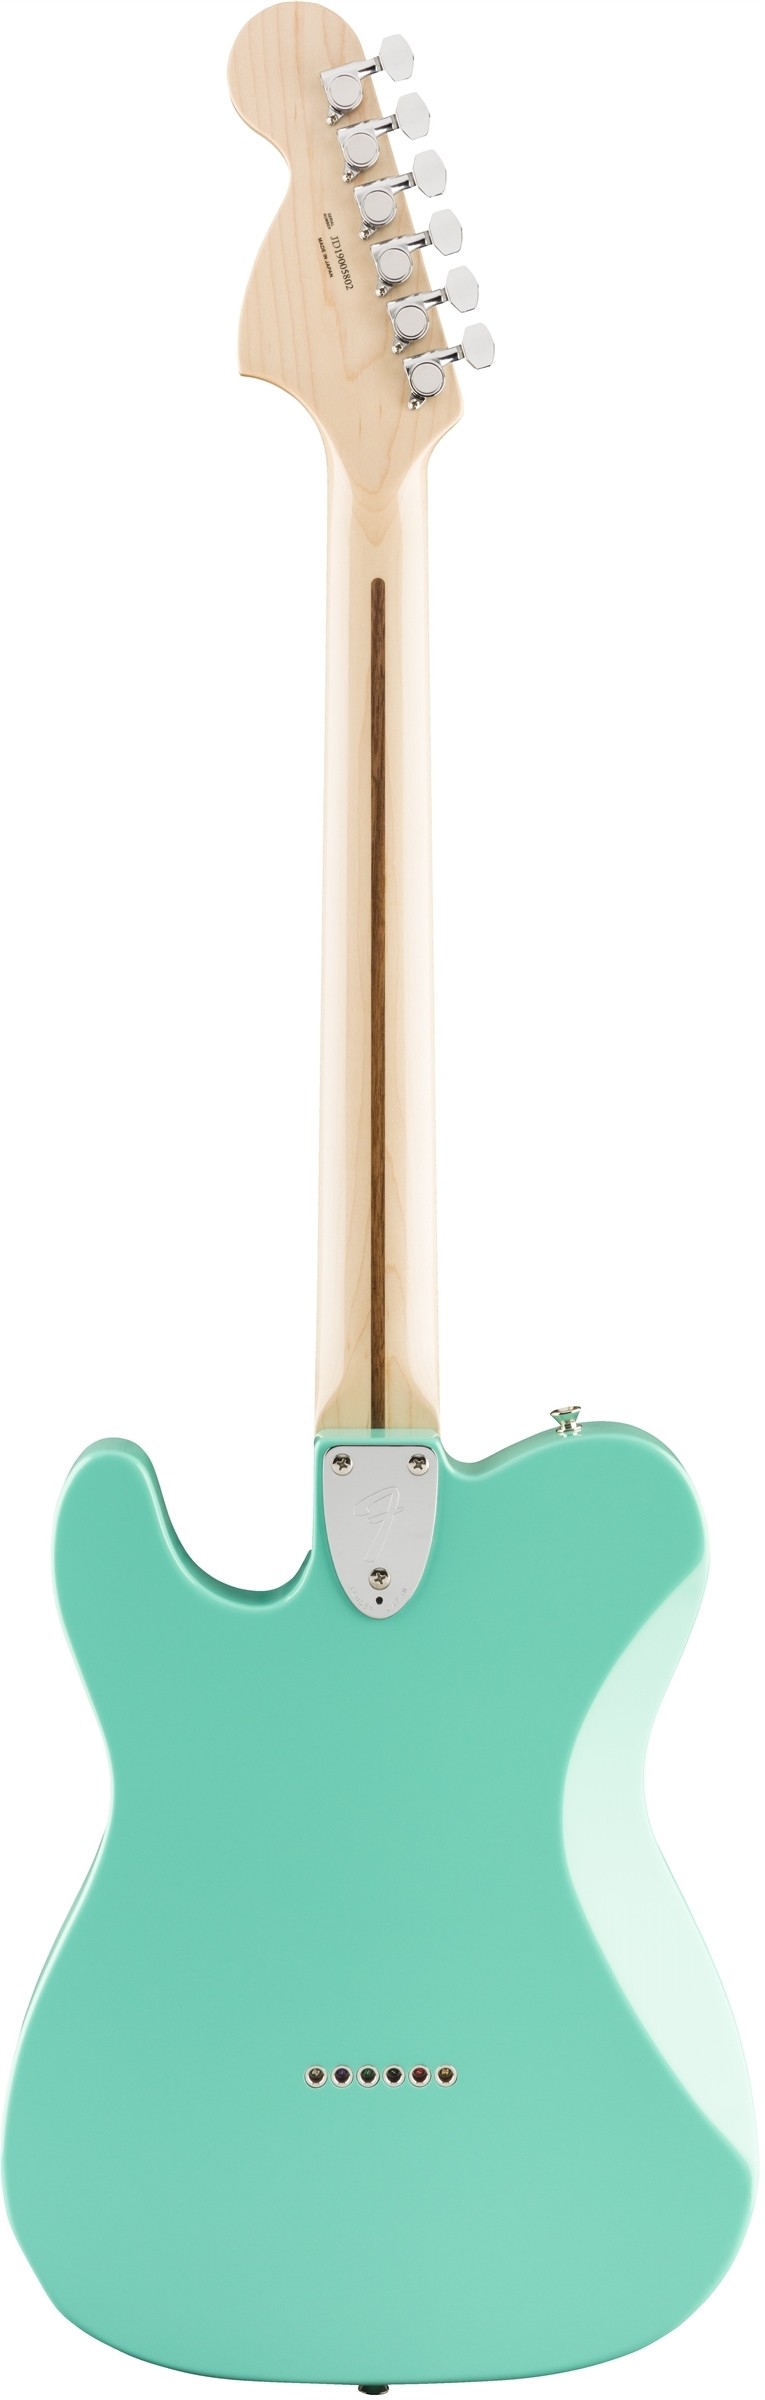 Fender 2020 Limited Edition Traditional 70s Tele Deluxe Seafoam Green